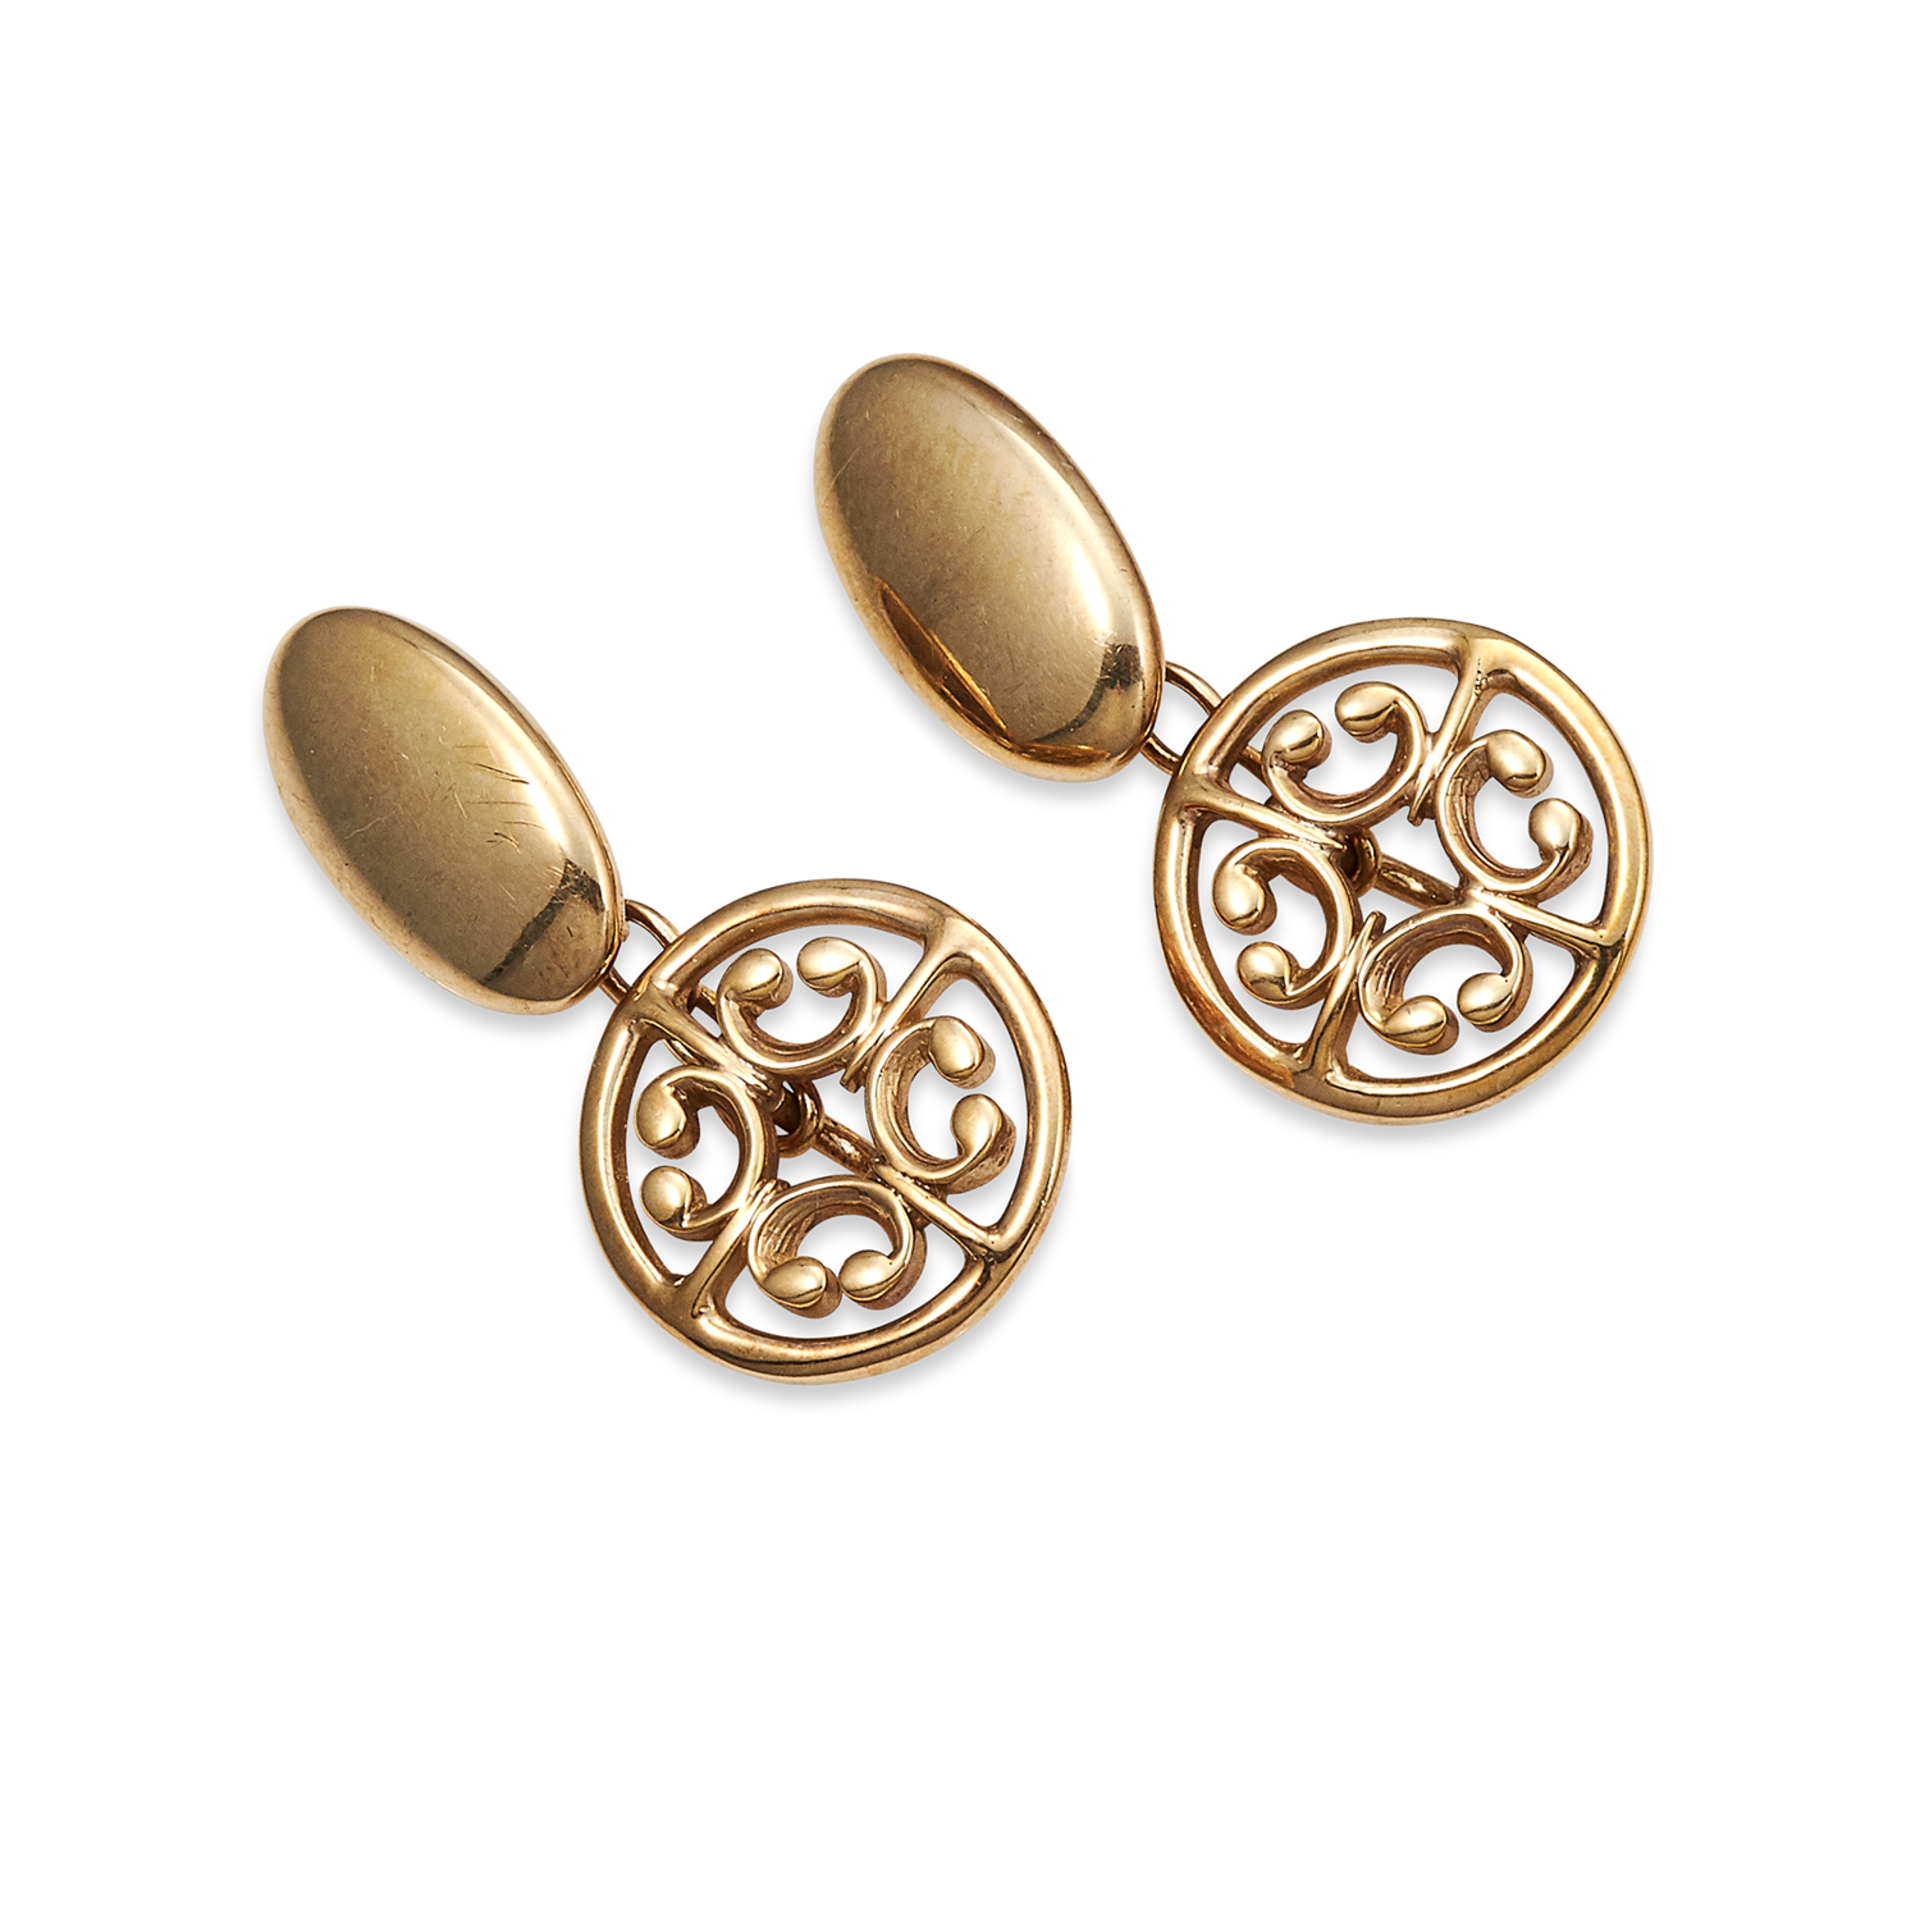 A PAIR OF ANTIQUE ST. MAGNUS CROSS CUFFLINKS in 9ct yellow gold, the circular face is set with the